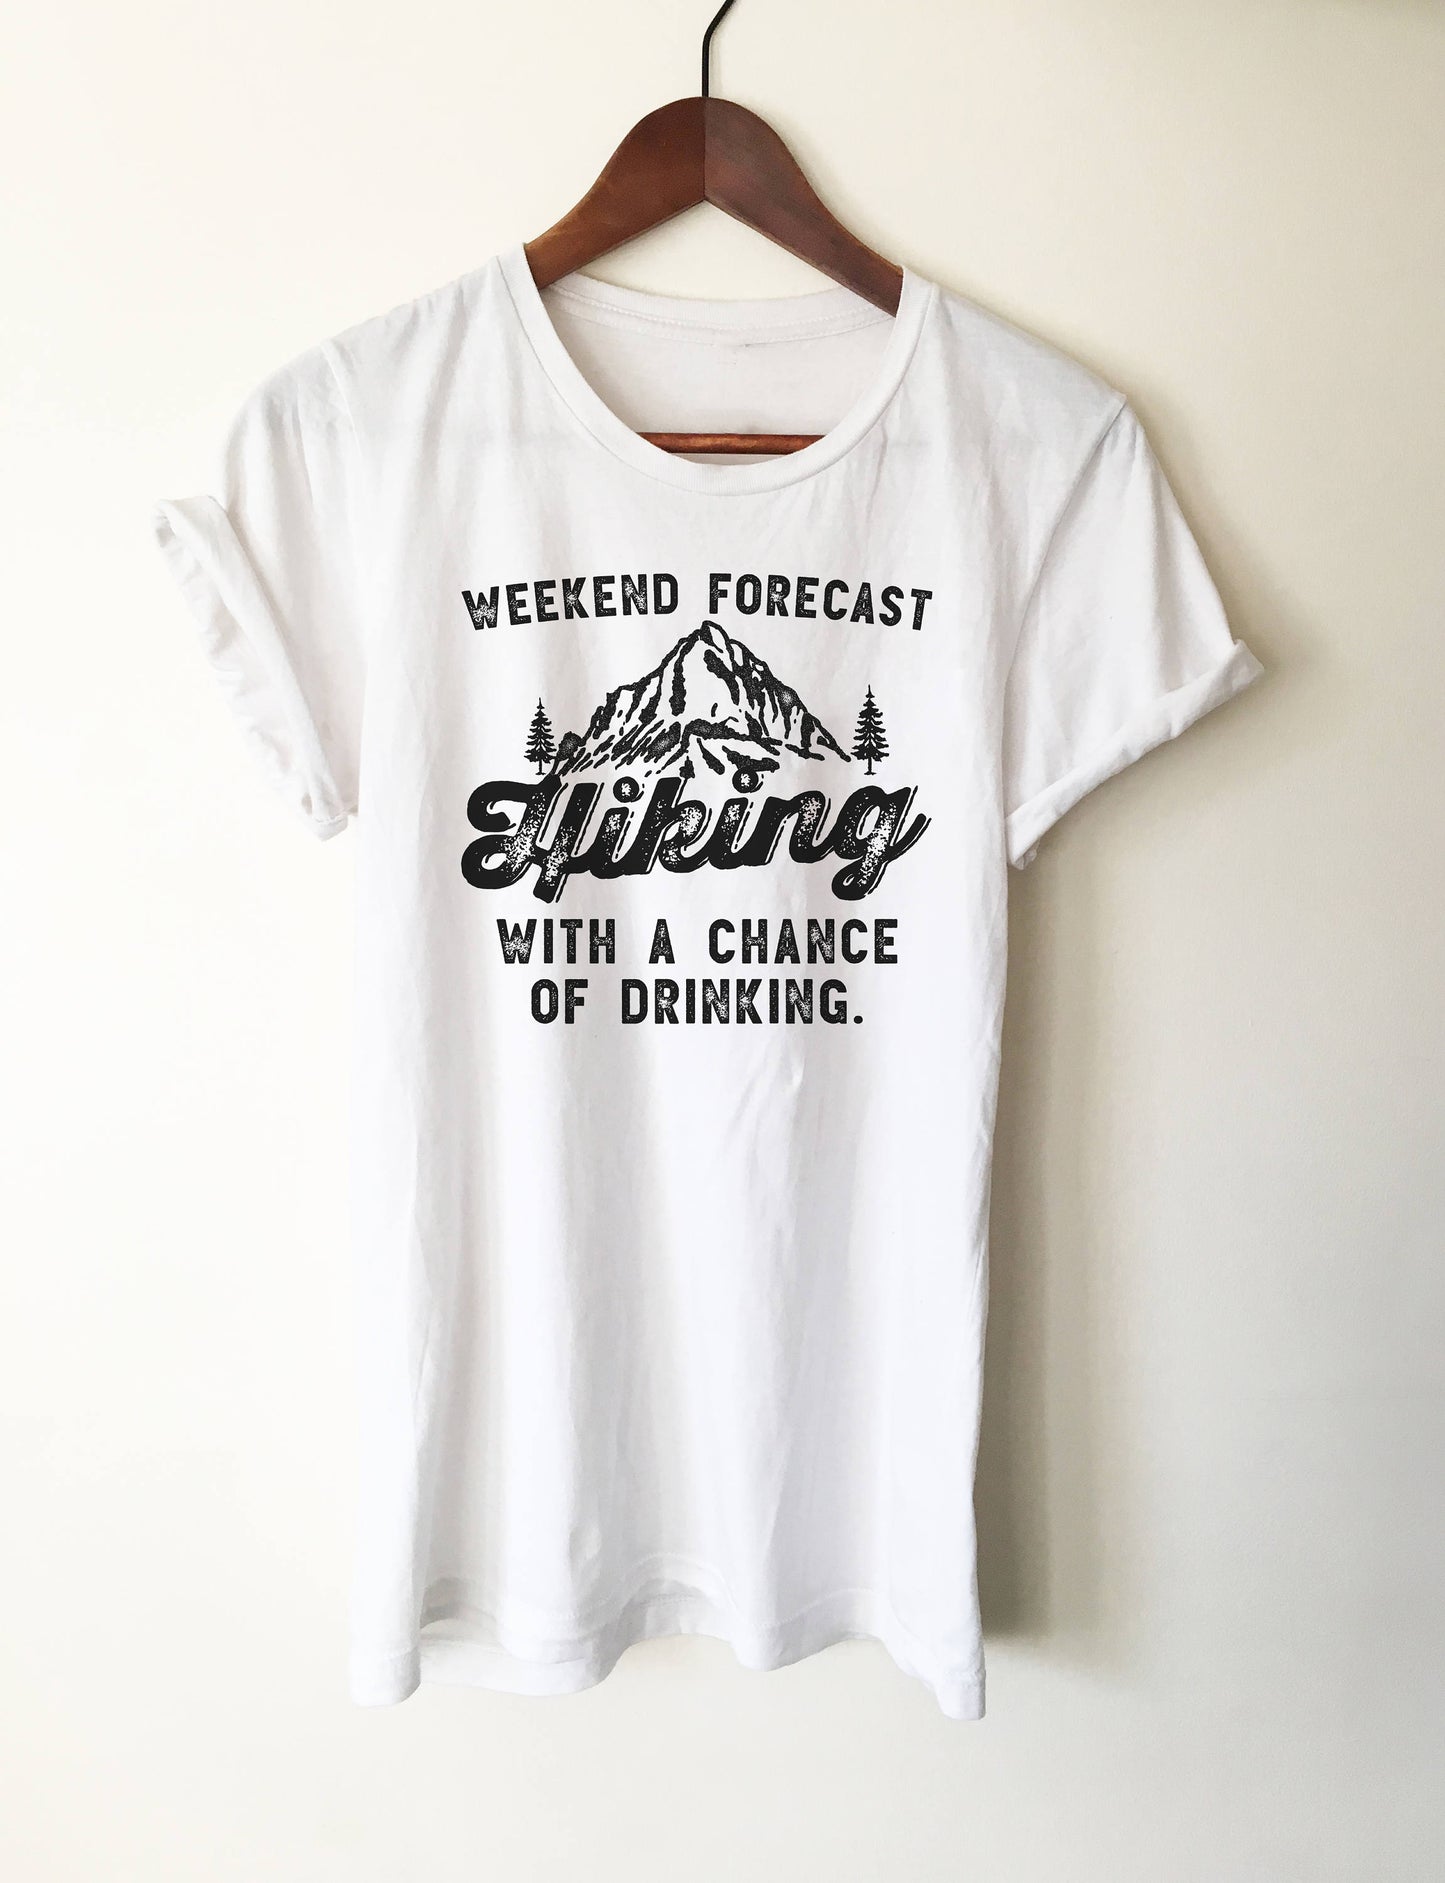 Hiking With A Chance Of Drinking Unisex Shirt - Hiking shirt, mountain shirt, wanderlust shirt, hiking shirt for women, gift for hiker